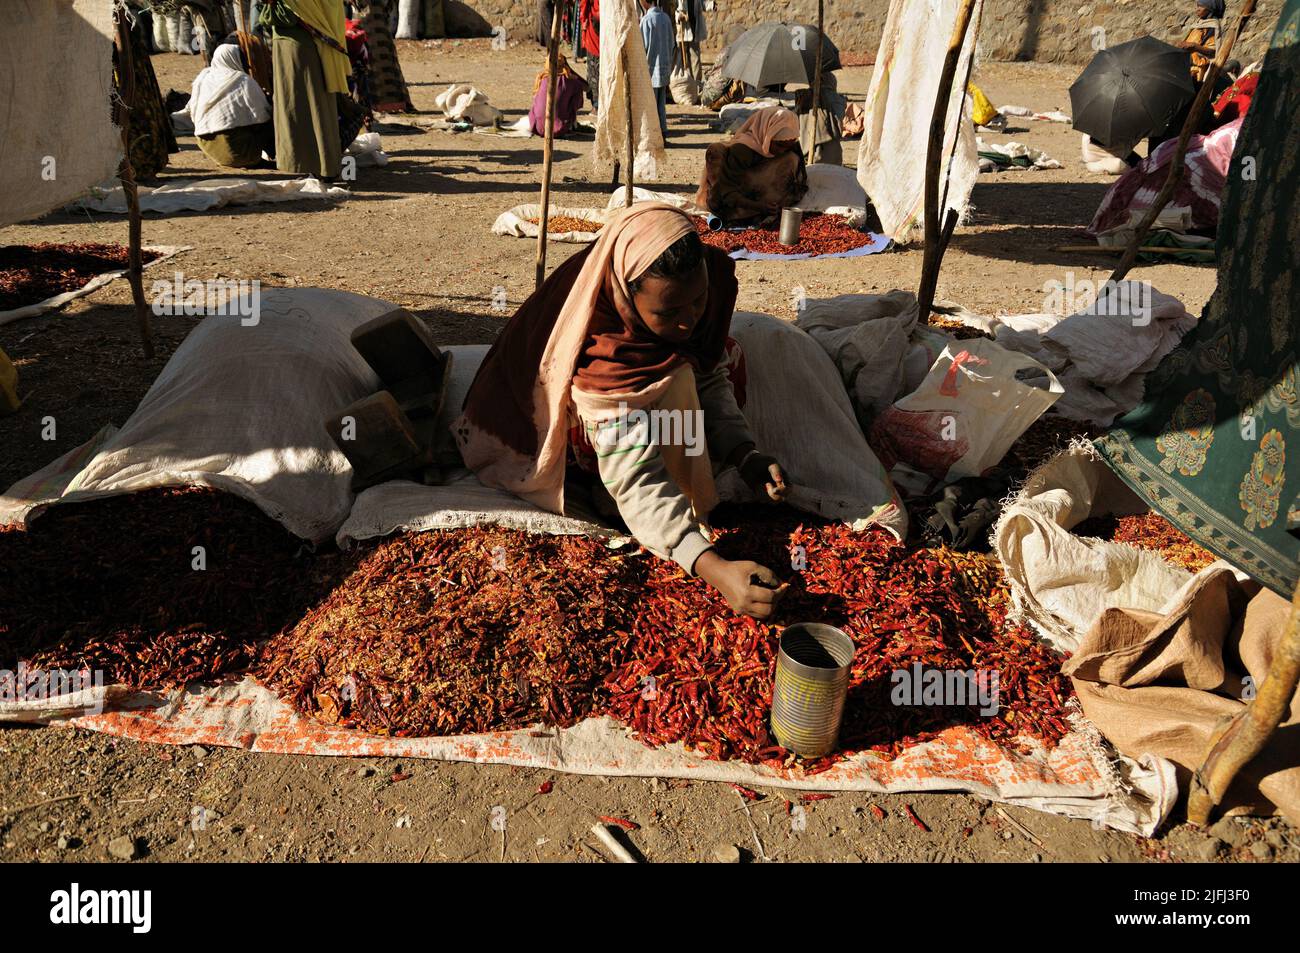 Woman selling red chili peppers at Bati market, Amhara Region, Ethiopia Stock Photo